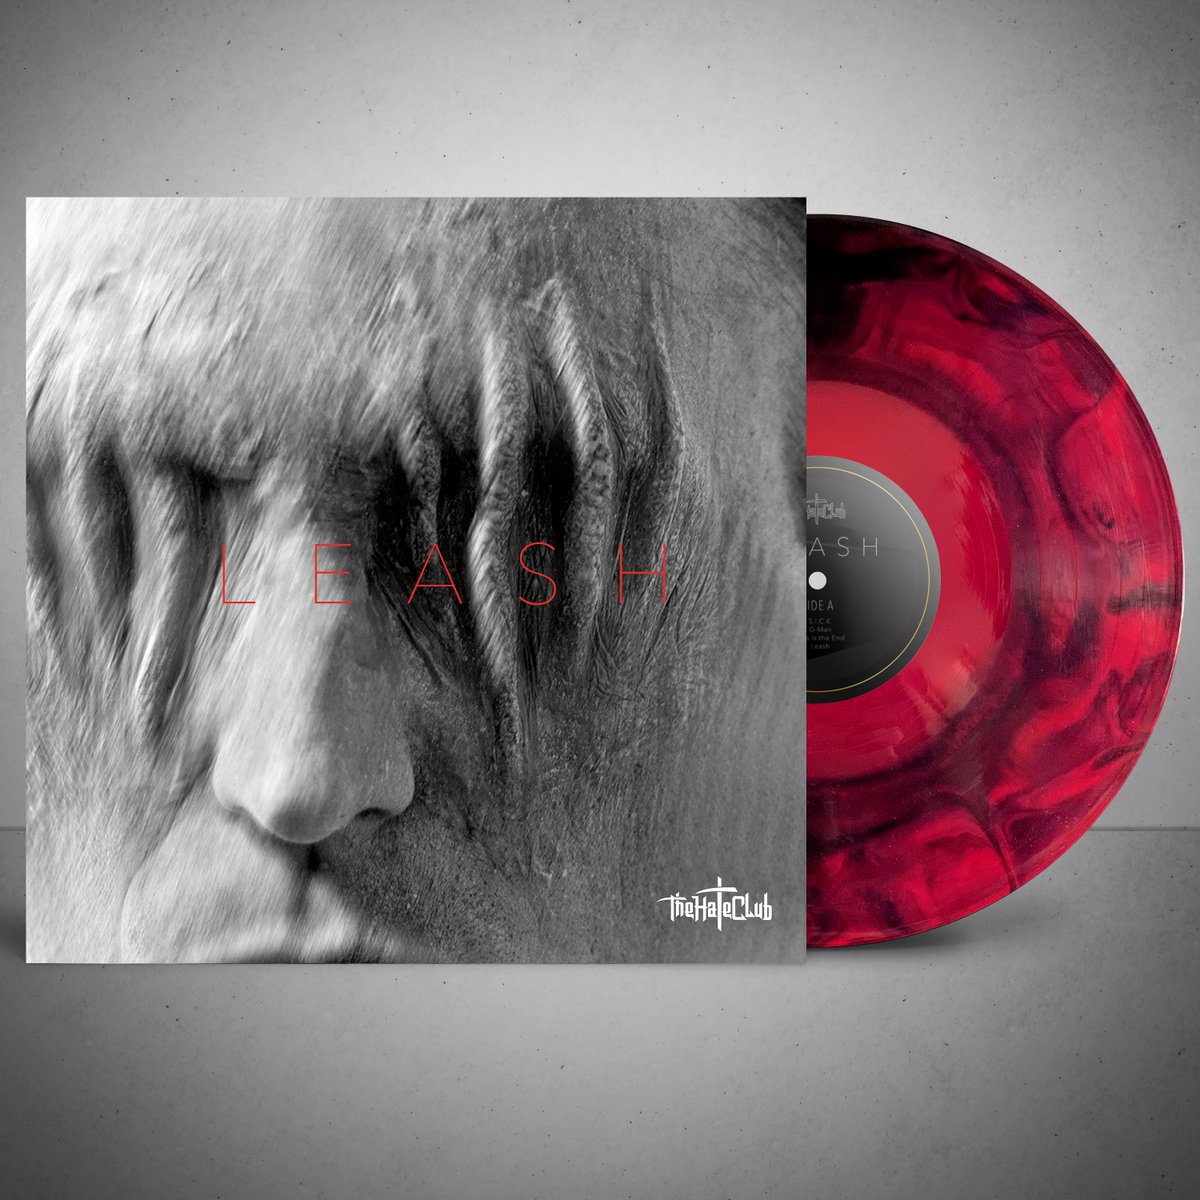 We are so proud to Announce The band The Hate Club colored Vinyl we completed @thehateclub thehateclub.com/.../leash-sign… #thehateclub #thehateclubband #vinyl #redmarble